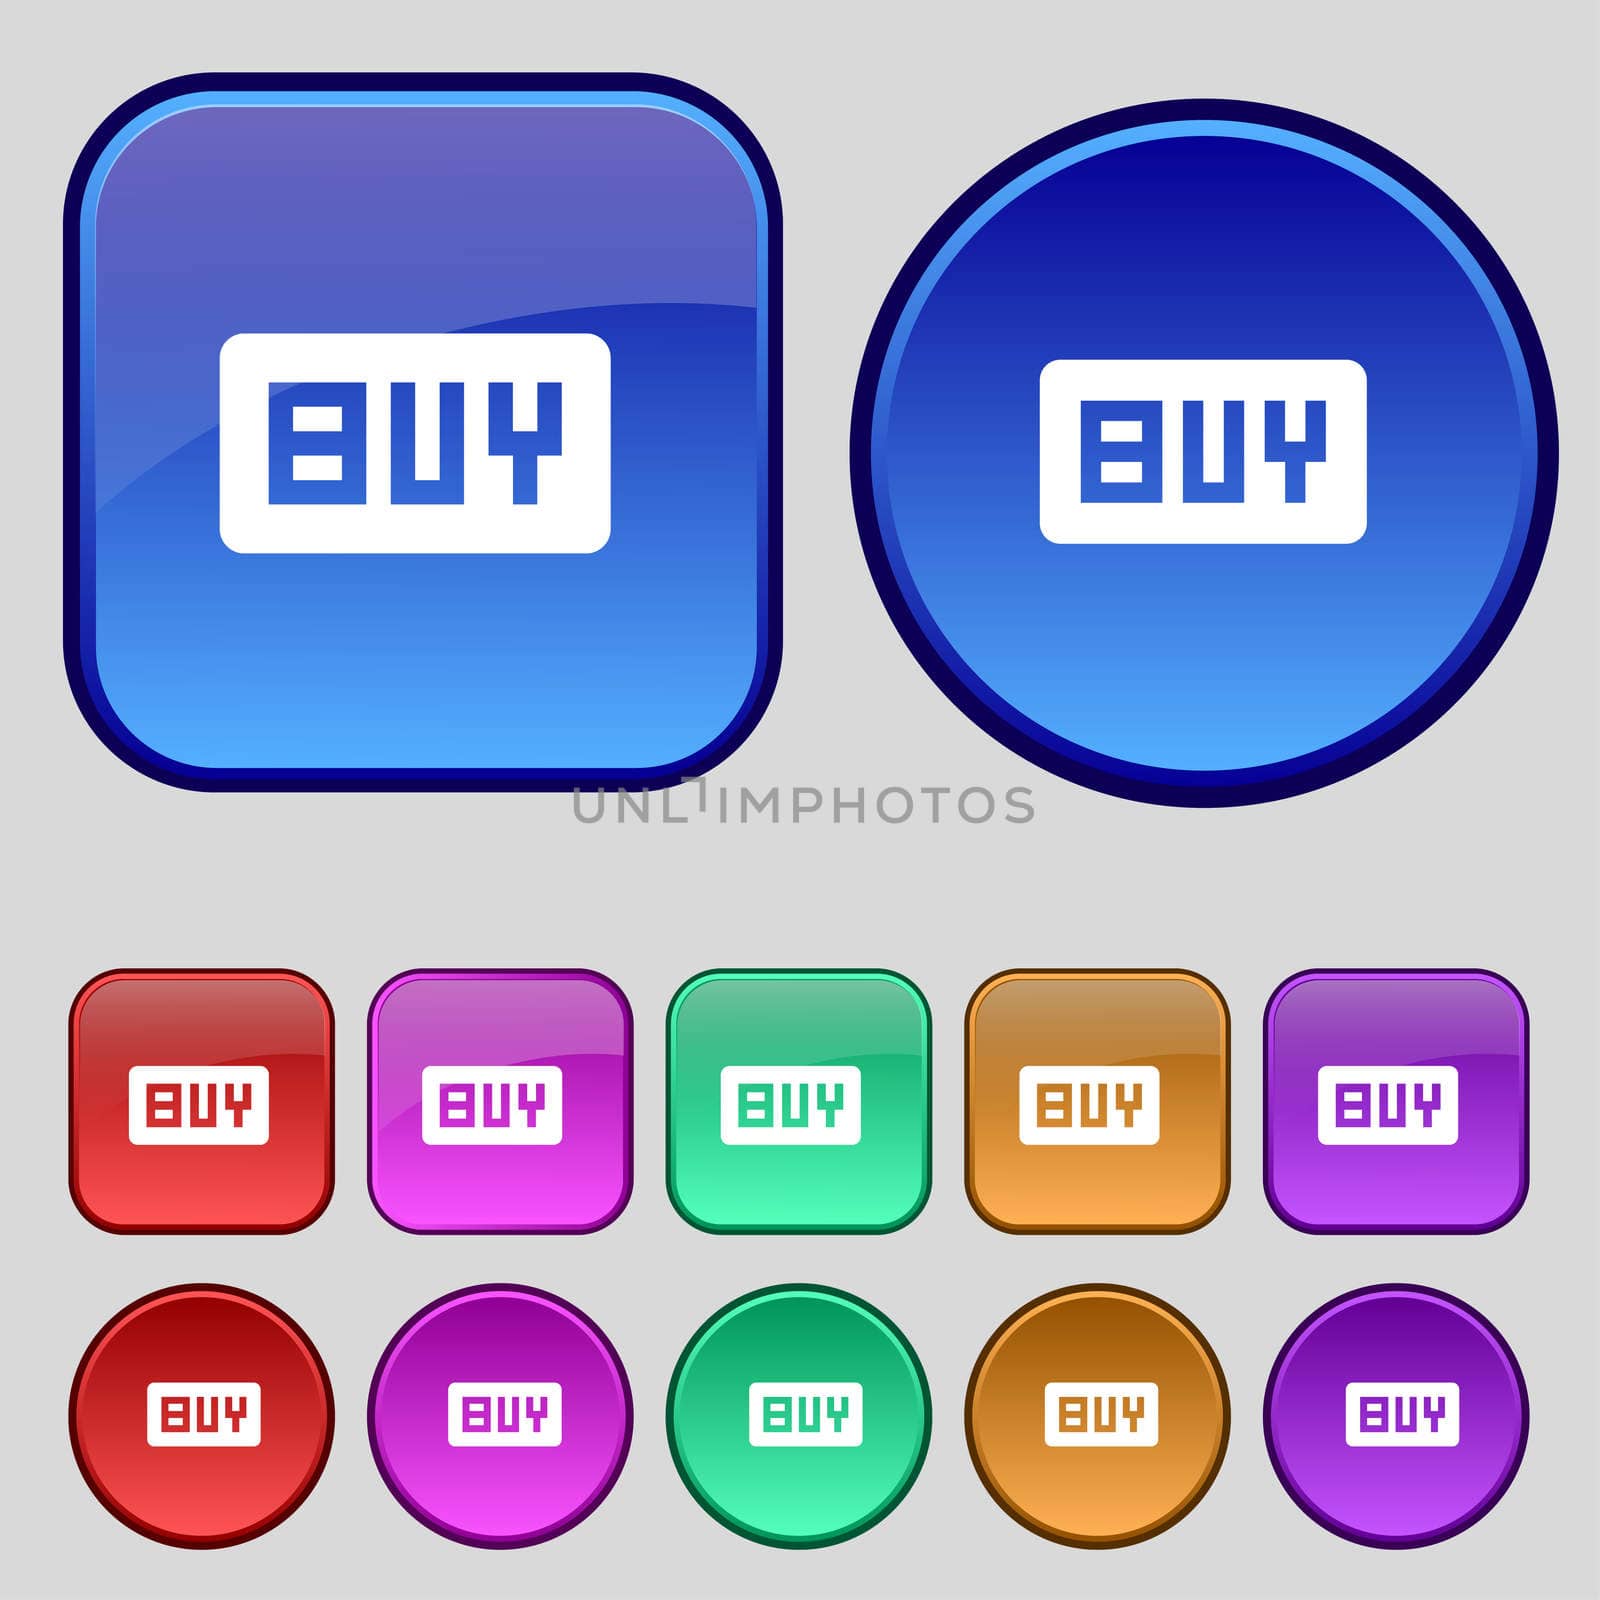 Buy, Online buying dollar usd icon sign. A set of twelve vintage buttons for your design. illustration